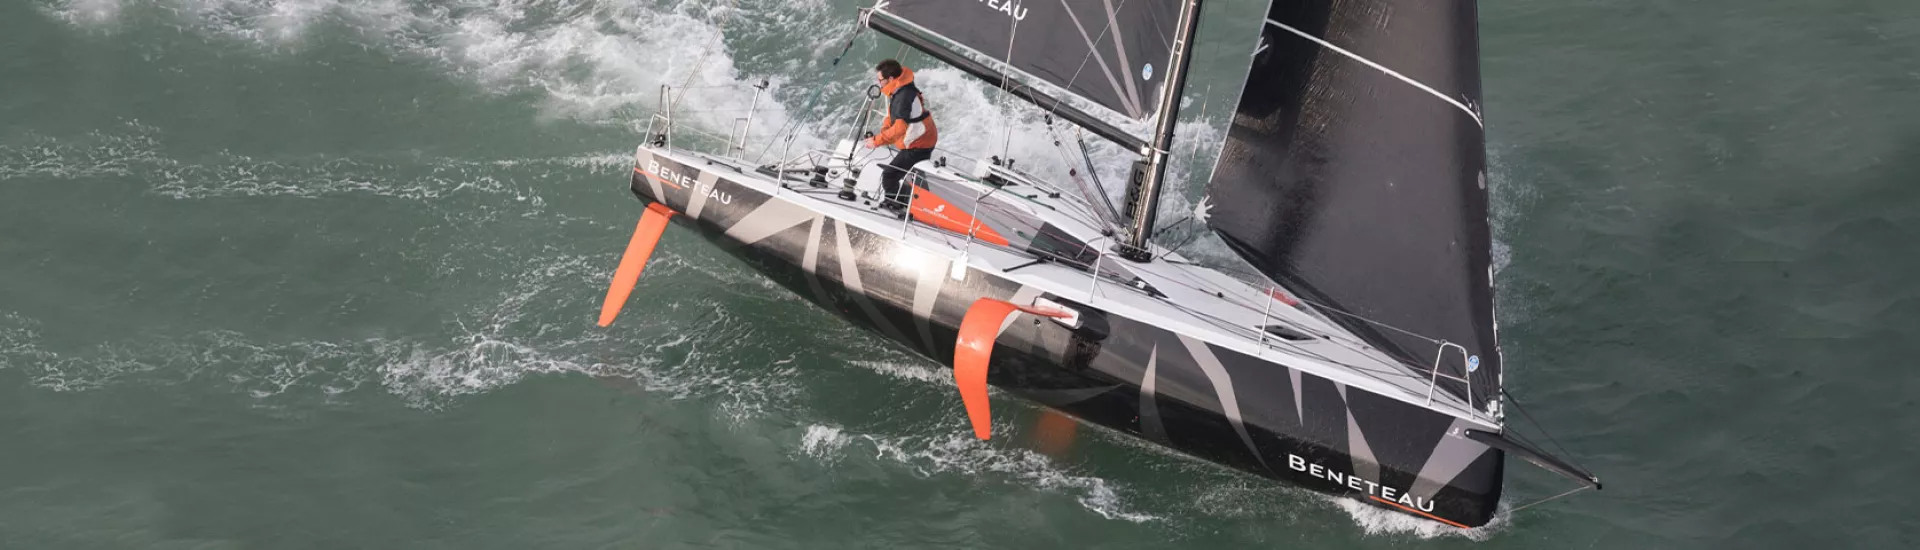 monohull sailboat with foils